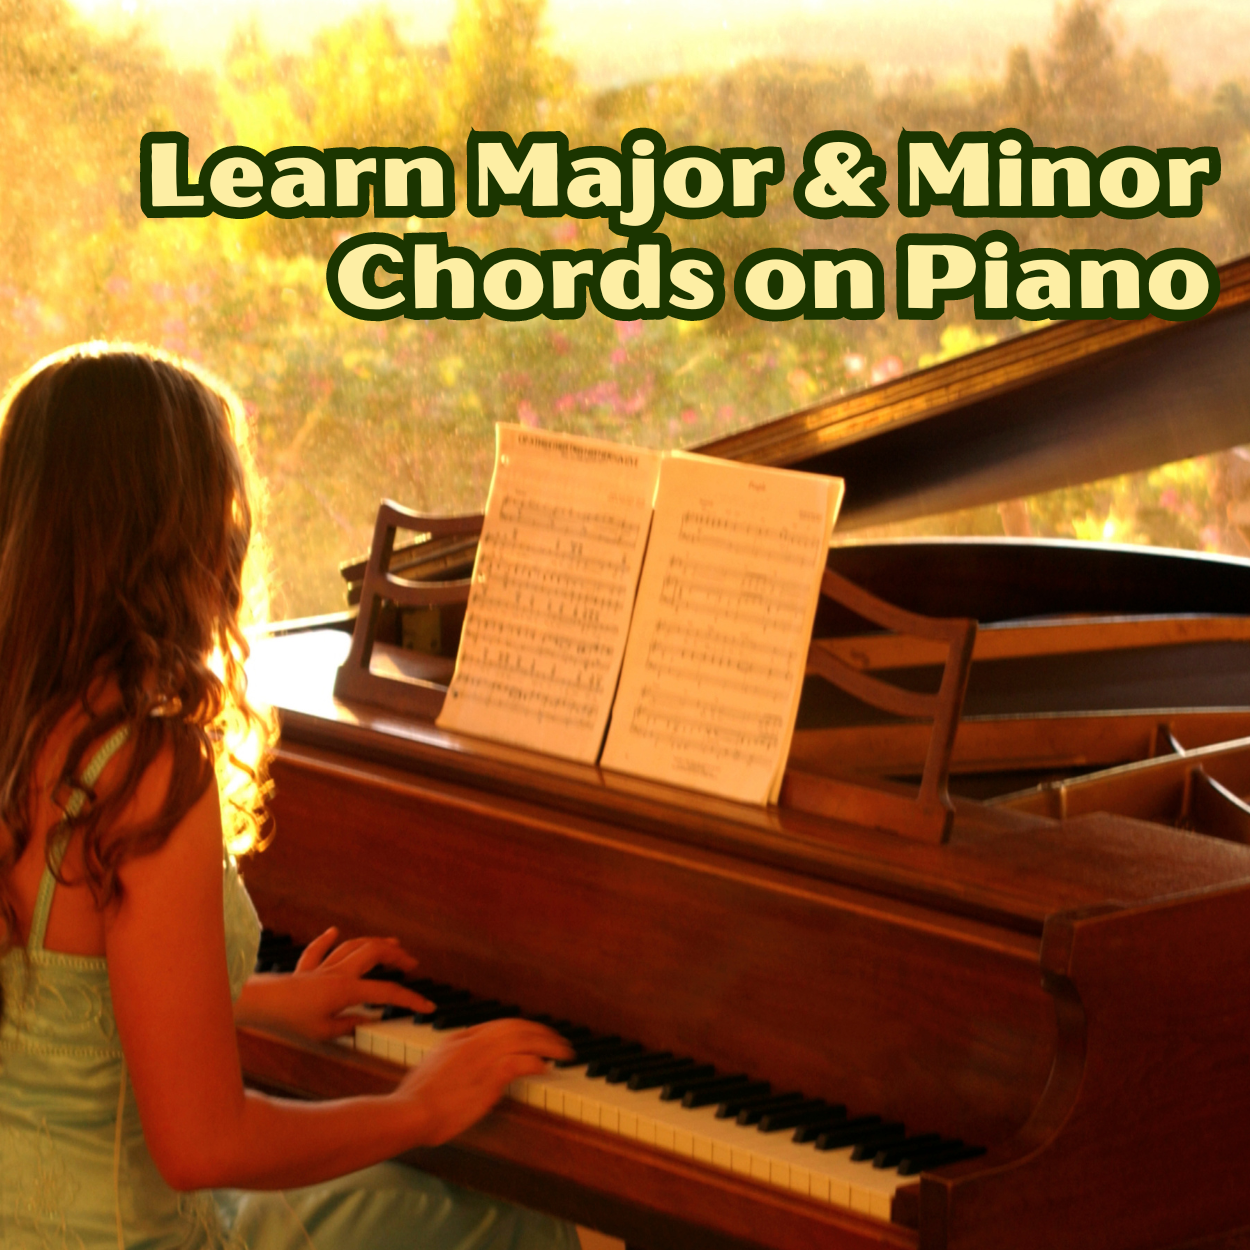 How Can You Learn Major & Minor Chords on Piano?